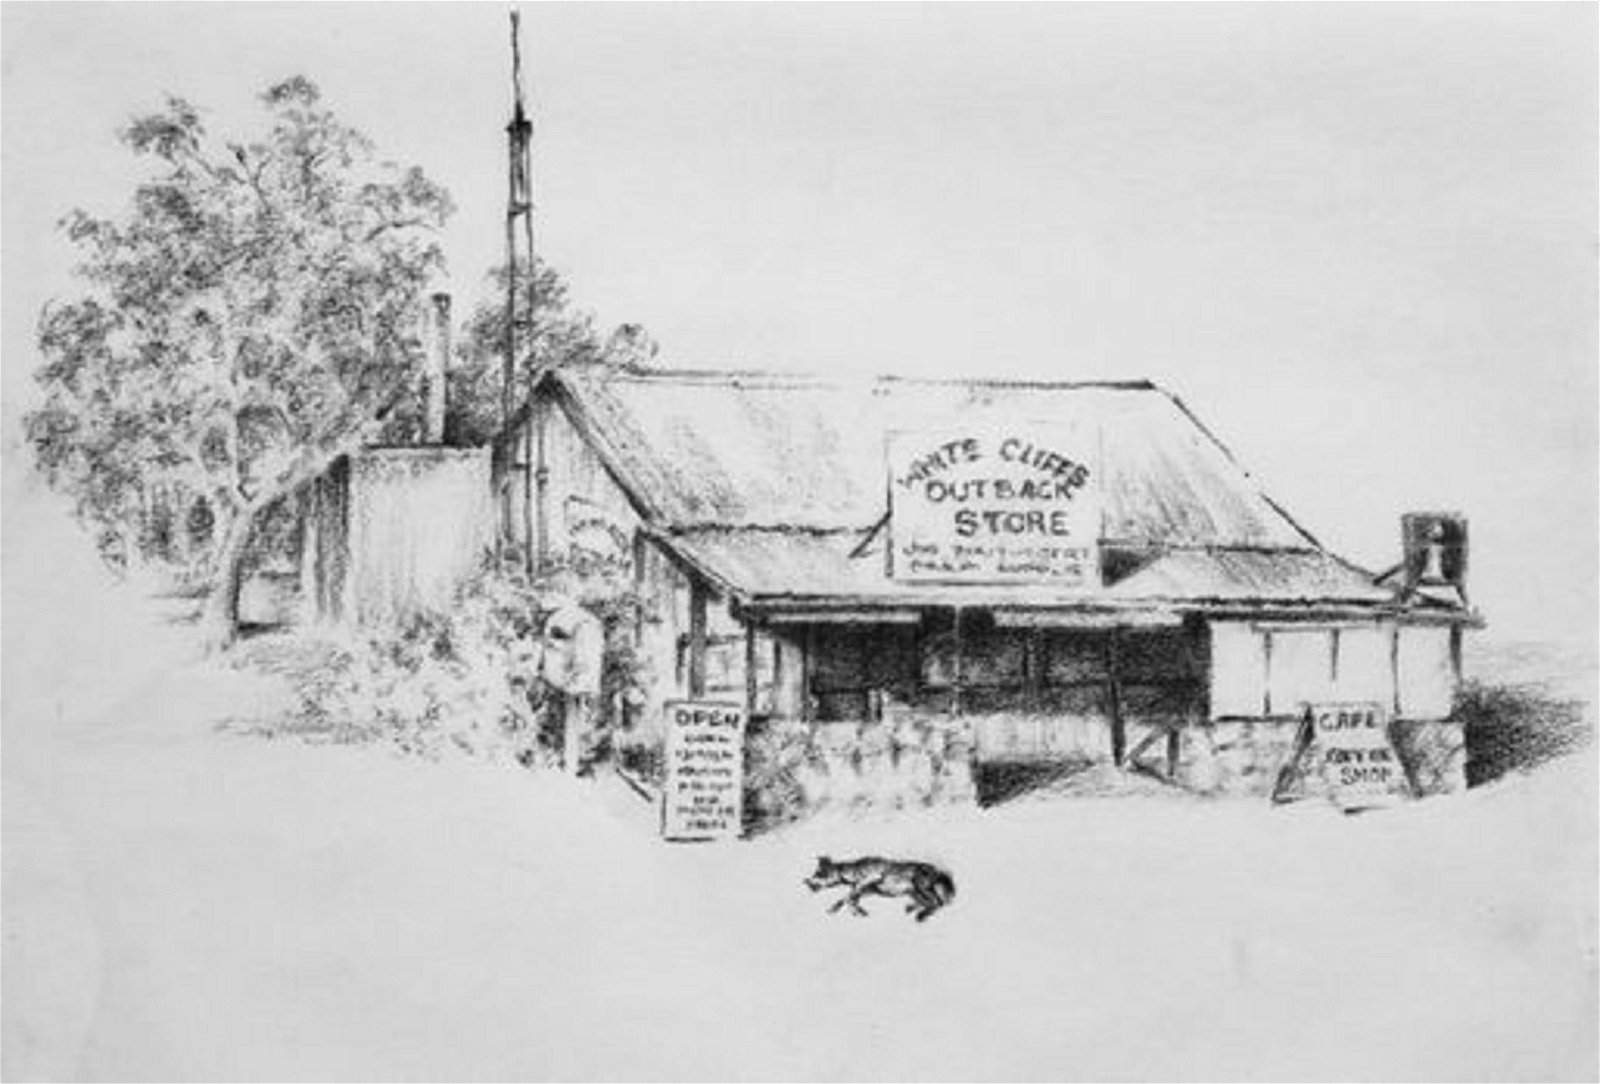 White Cliffs Outback Store - New South Wales Tourism 